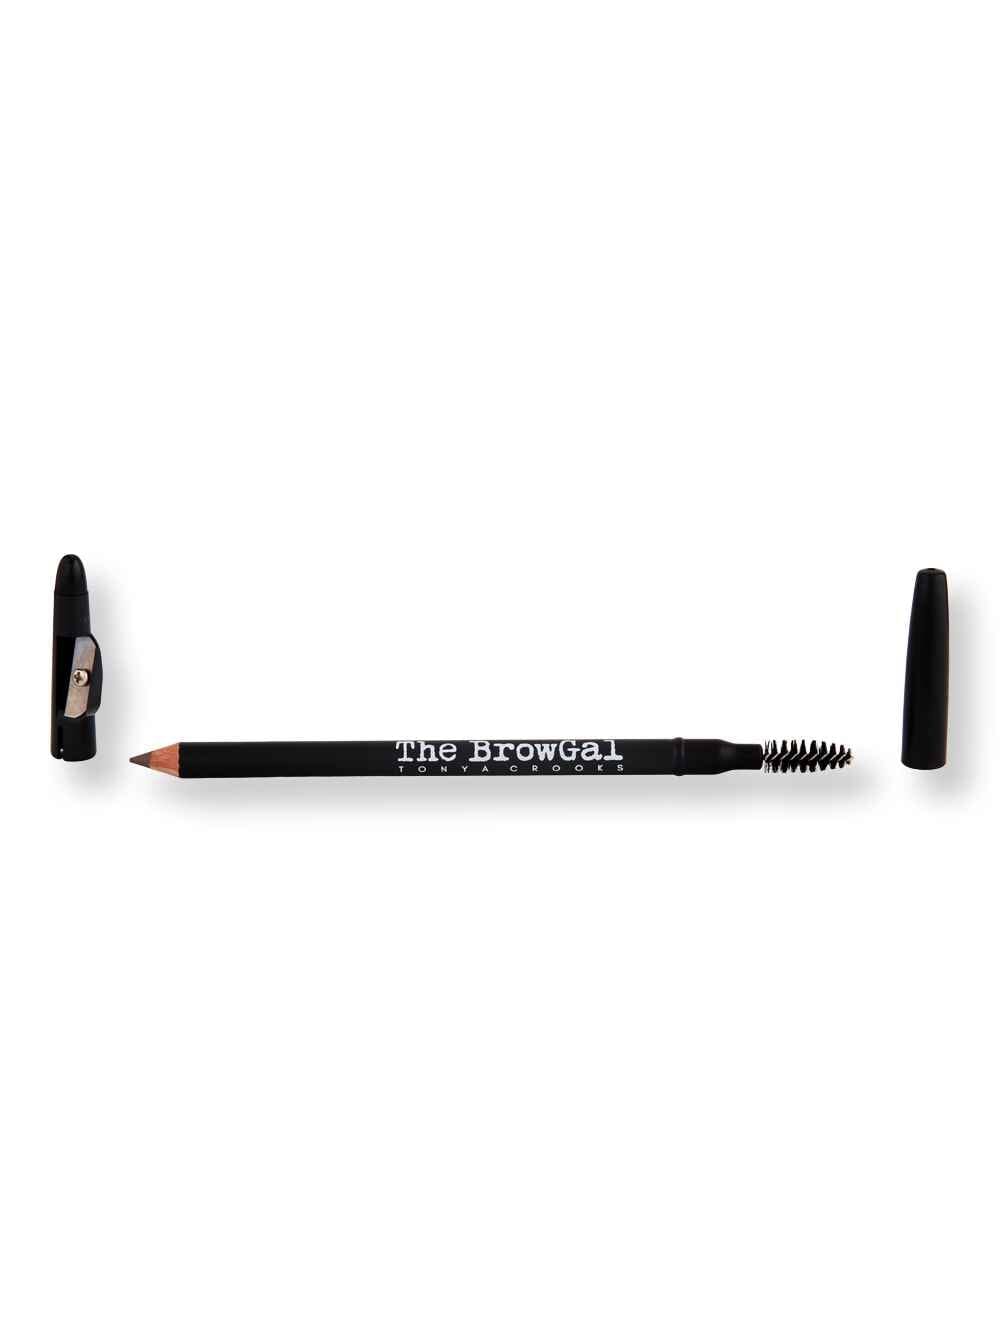 The BrowGal The BrowGal Eyebrow Pencil with Sharpener Cap + Mascara Brush 05 Taupe Eyebrows 